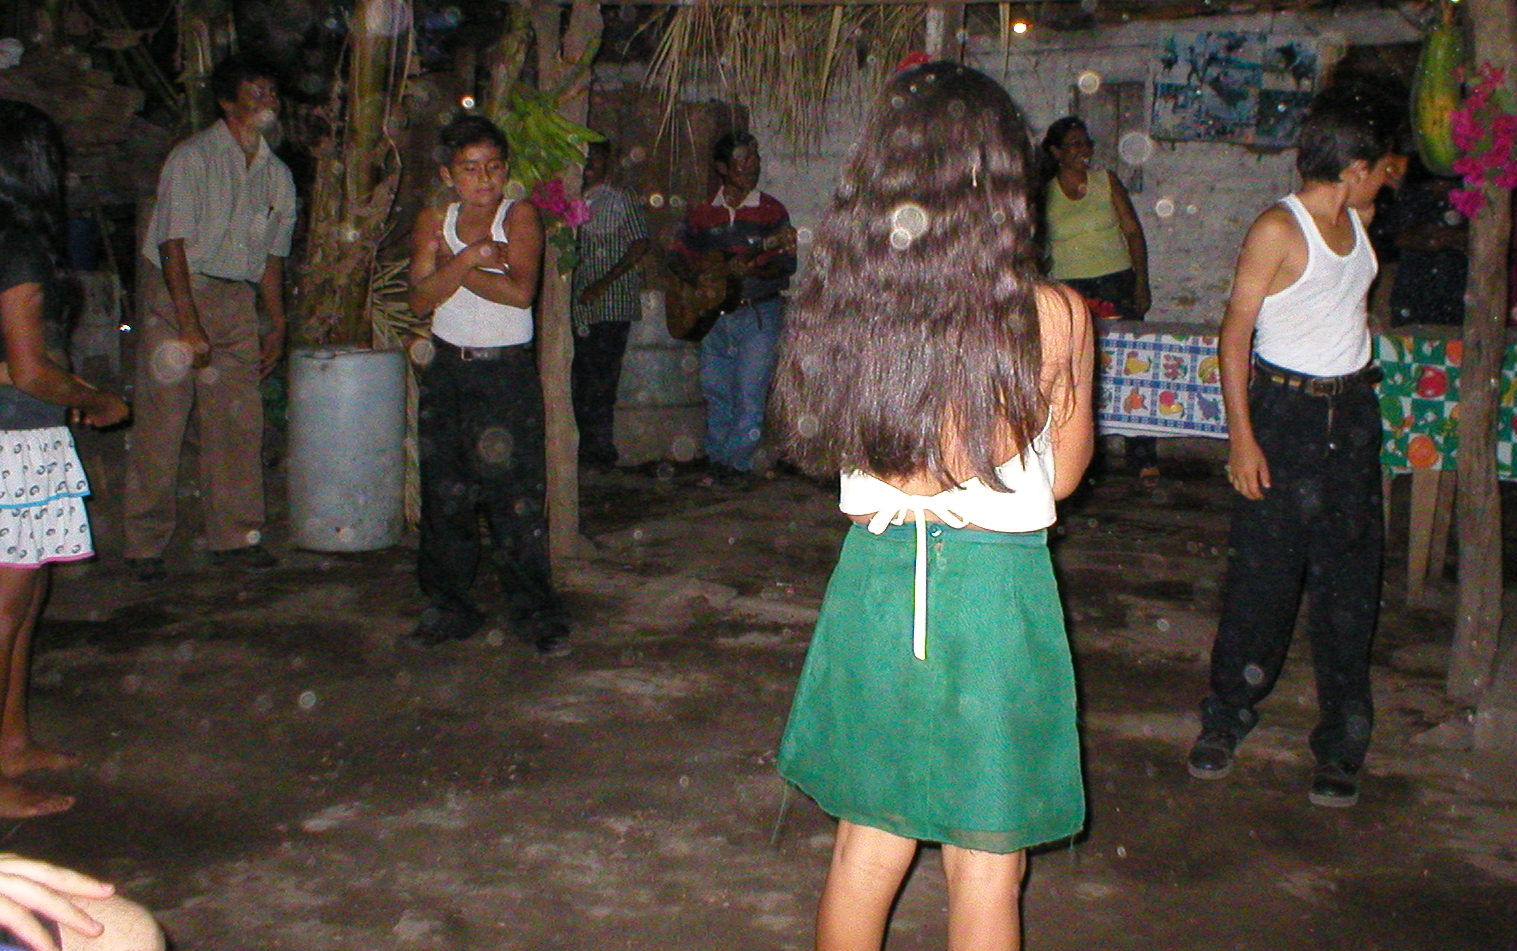 a group of people gathered around playing a game